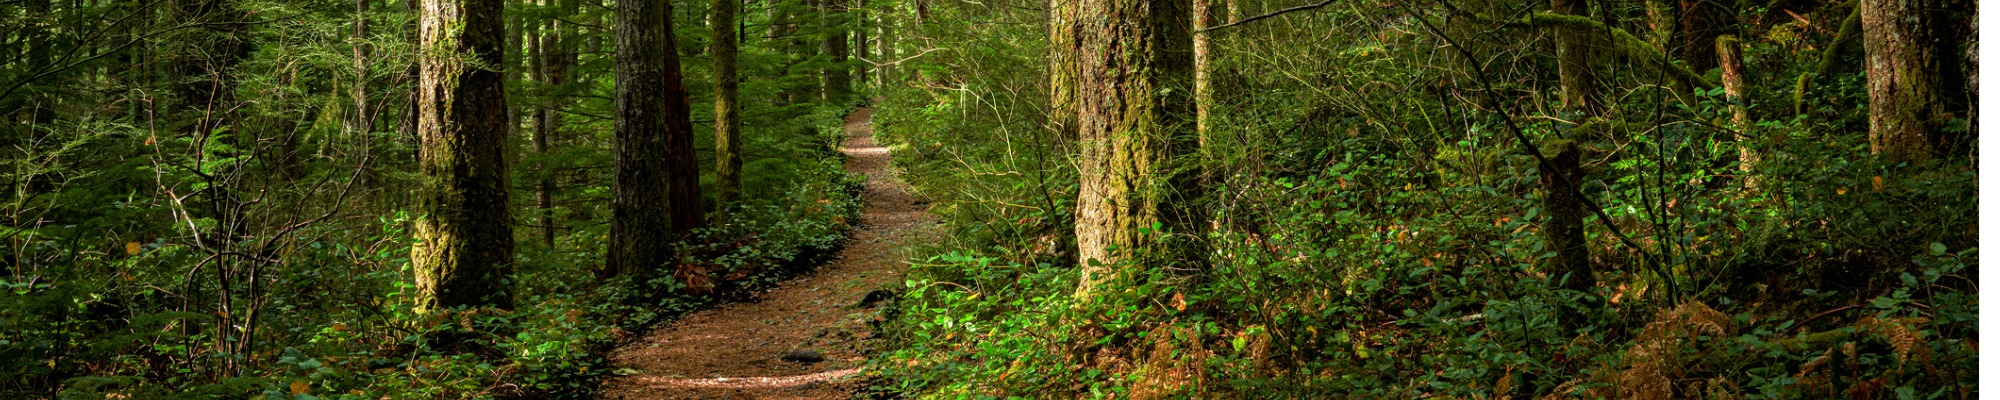 A scenic pathway through heavily forested woods